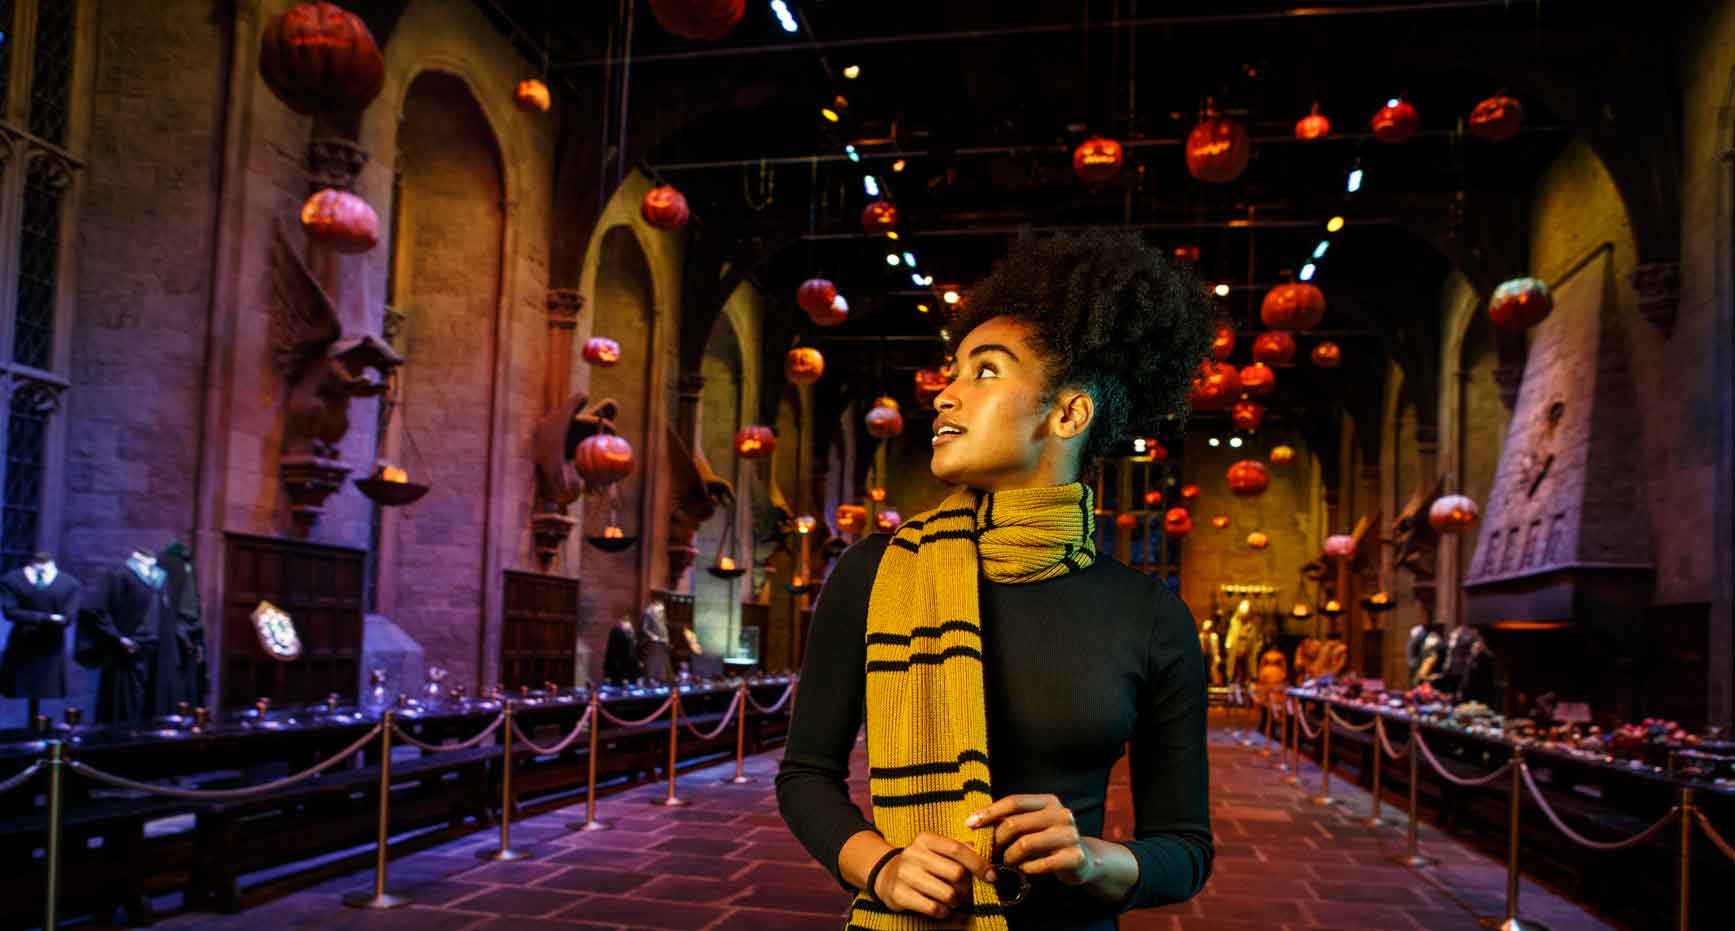 Visitor in the Great Hall during Dark Arts